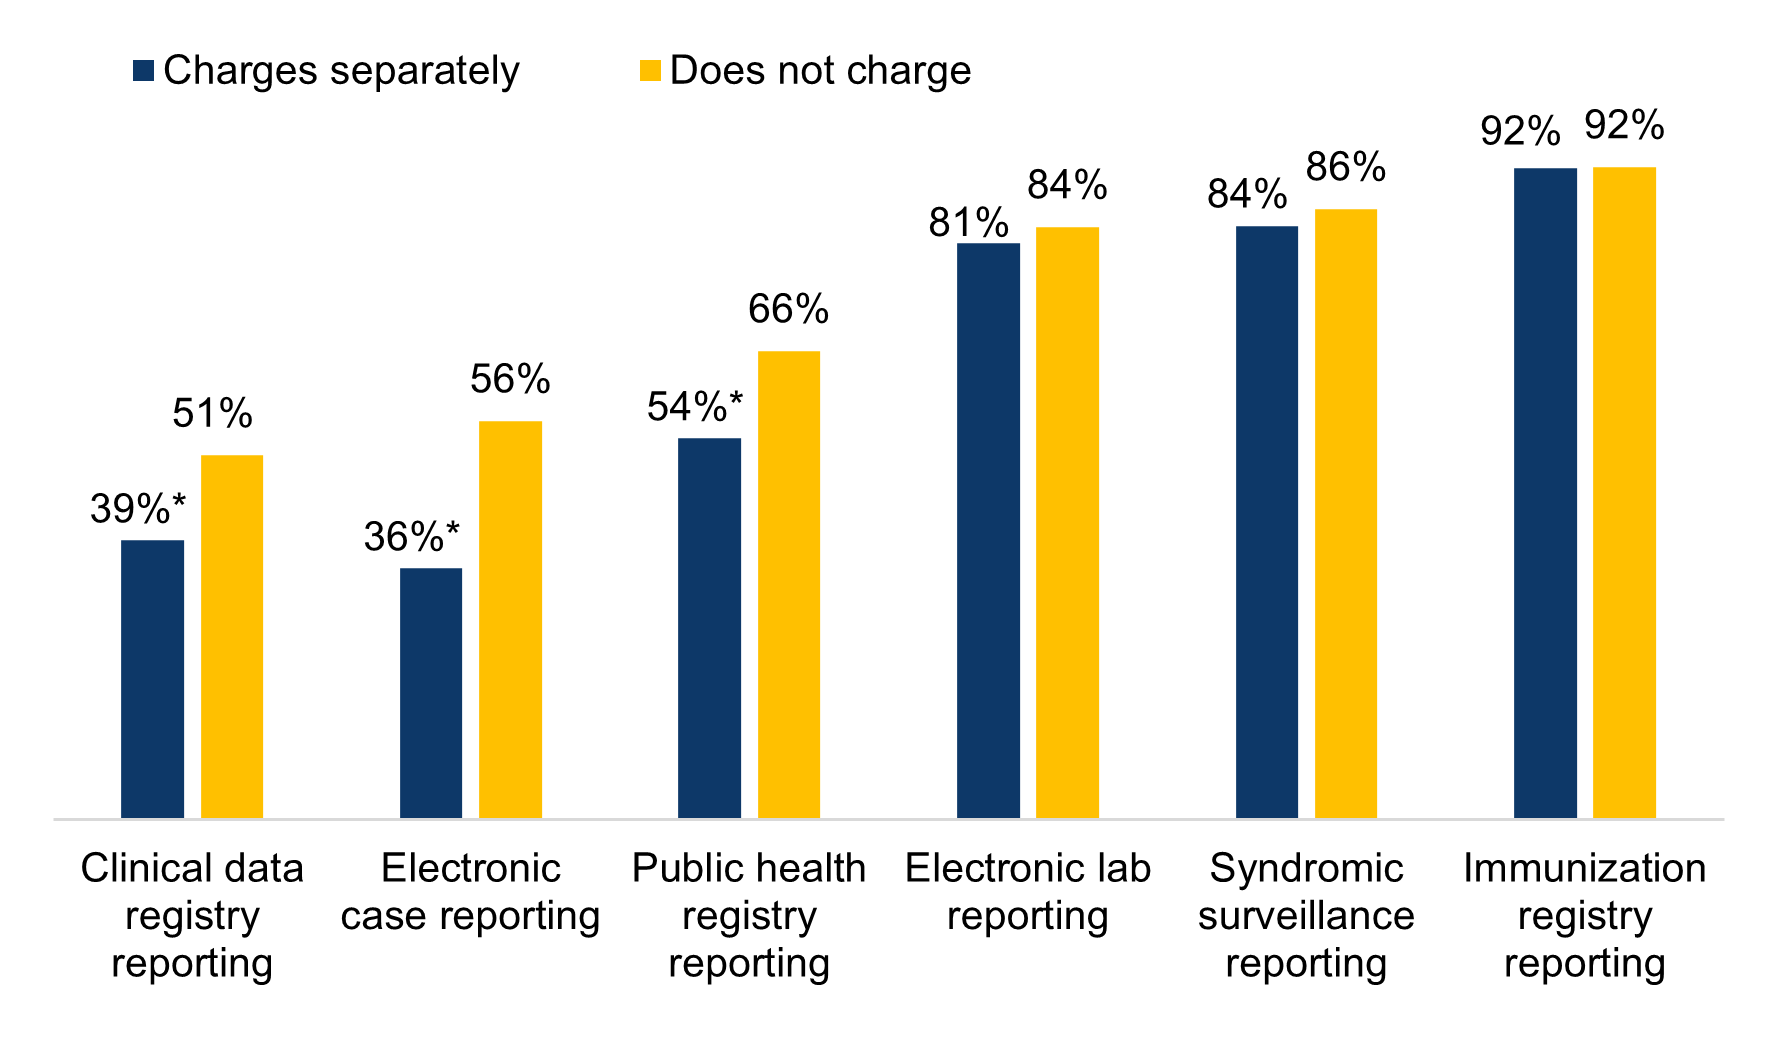 Figure 4 - Percent of non-federal acute care hospitals actively engaged in electronic public health reporting by whether their EHR developer charged separately to submit data for public health reporting activities, 2021. This figure contains a vertical clustered column chart showing the percent of non-federal acute care hospitals actively engaged in each of the six types of electronic public health reporting by whether their EHR developer charged separately to submit data for public health reporting in 2021. The first cluster of columns shows that 39 percent of hospitals whose EHR developer charges separately for public health reporting were actively engaged in electronic clinical data registry reporting compared to 51 percent of hospitals whose EHR developer does not charge (a statistically significant difference).  The second cluster of columns shows that 36 percent of hospitals whose EHR developer charges separately for public health reporting were actively engaged in electronic case reporting compared to 56 percent of hospitals whose EHR developer does not charge (a statistically significant difference).  The third cluster of columns shows that 54 percent of hospitals whose EHR developer charges separately for public health reporting were actively engaged in electronic public health registry reporting compared to 66 percent of hospitals whose EHR developer does not charge (a statistically significant difference).  The fourth cluster of columns shows that 81 percent of hospitals whose EHR developer charges separately for public health reporting were actively engaged in electronic lab result reporting compared to 84 percent of hospitals whose EHR developer does not charge.  The fifth cluster of columns shows that 84 percent of hospitals whose EHR developer charges separately for public health reporting were actively engaged in electronic syndromic surveillance reporting compared to 86 percent of hospitals whose EHR developer does not charge.  The sixth cluster of columns shows that 92 percent of hospitals whose